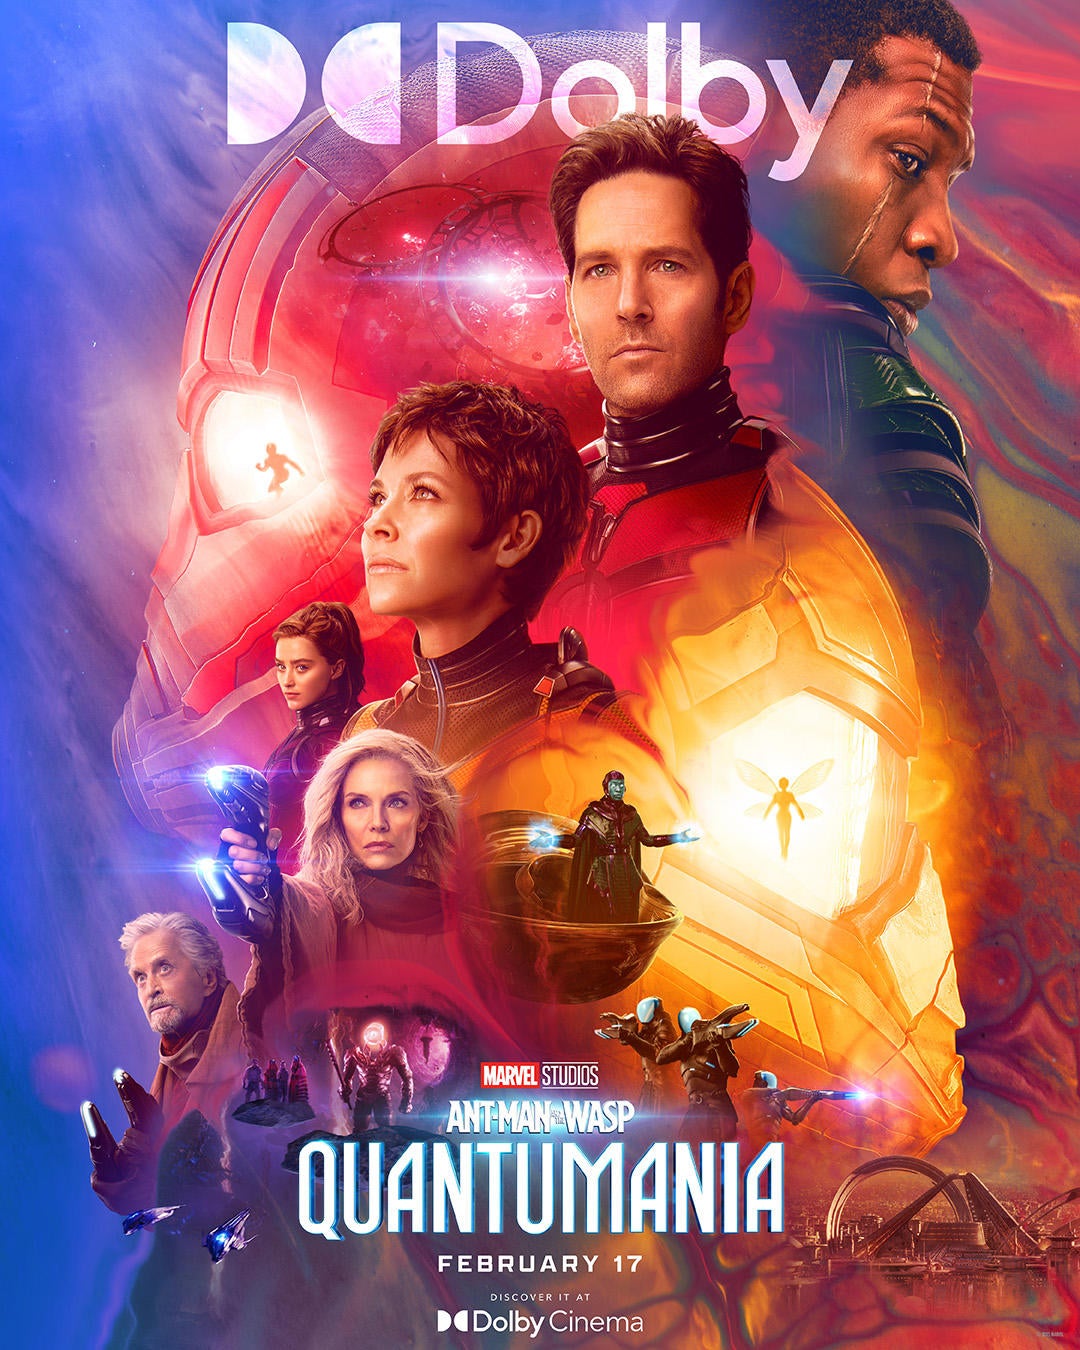 Ant-Man and The Wasp: Quantumania on X: Welcome to the Quantum Realm.  Check out the brand-new character poster for #Xolum in Marvel Studios'  #AntManAndTheWaspQuantumania. Now playing in 3D, only in theaters. Get